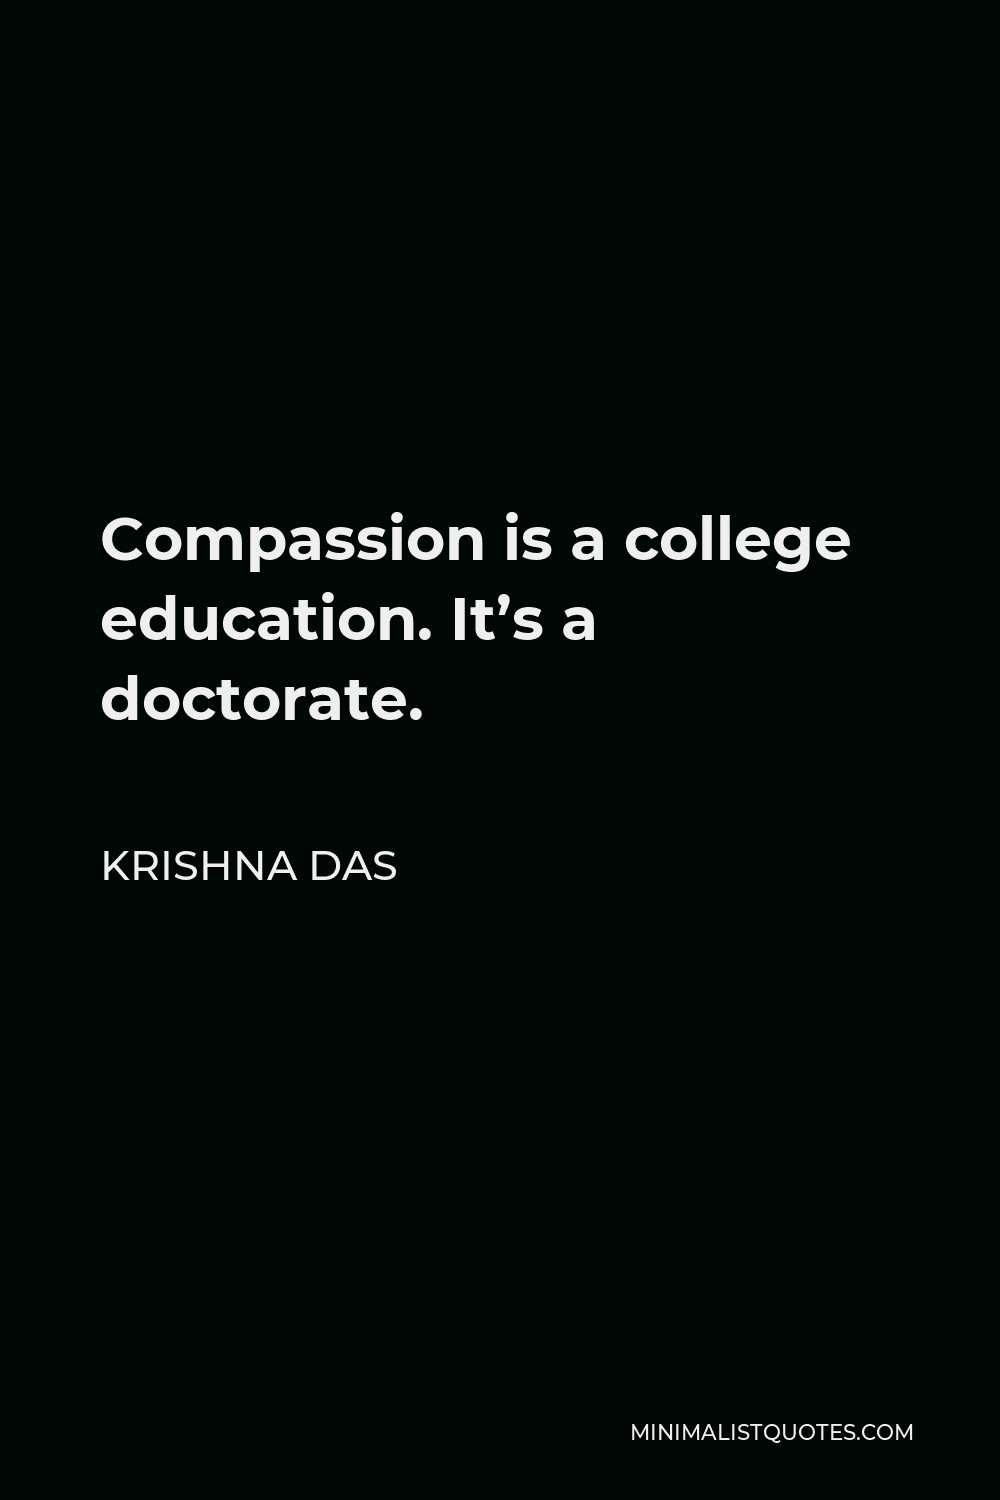 Krishna Das Quote - Compassion is a college education. It’s a doctorate.